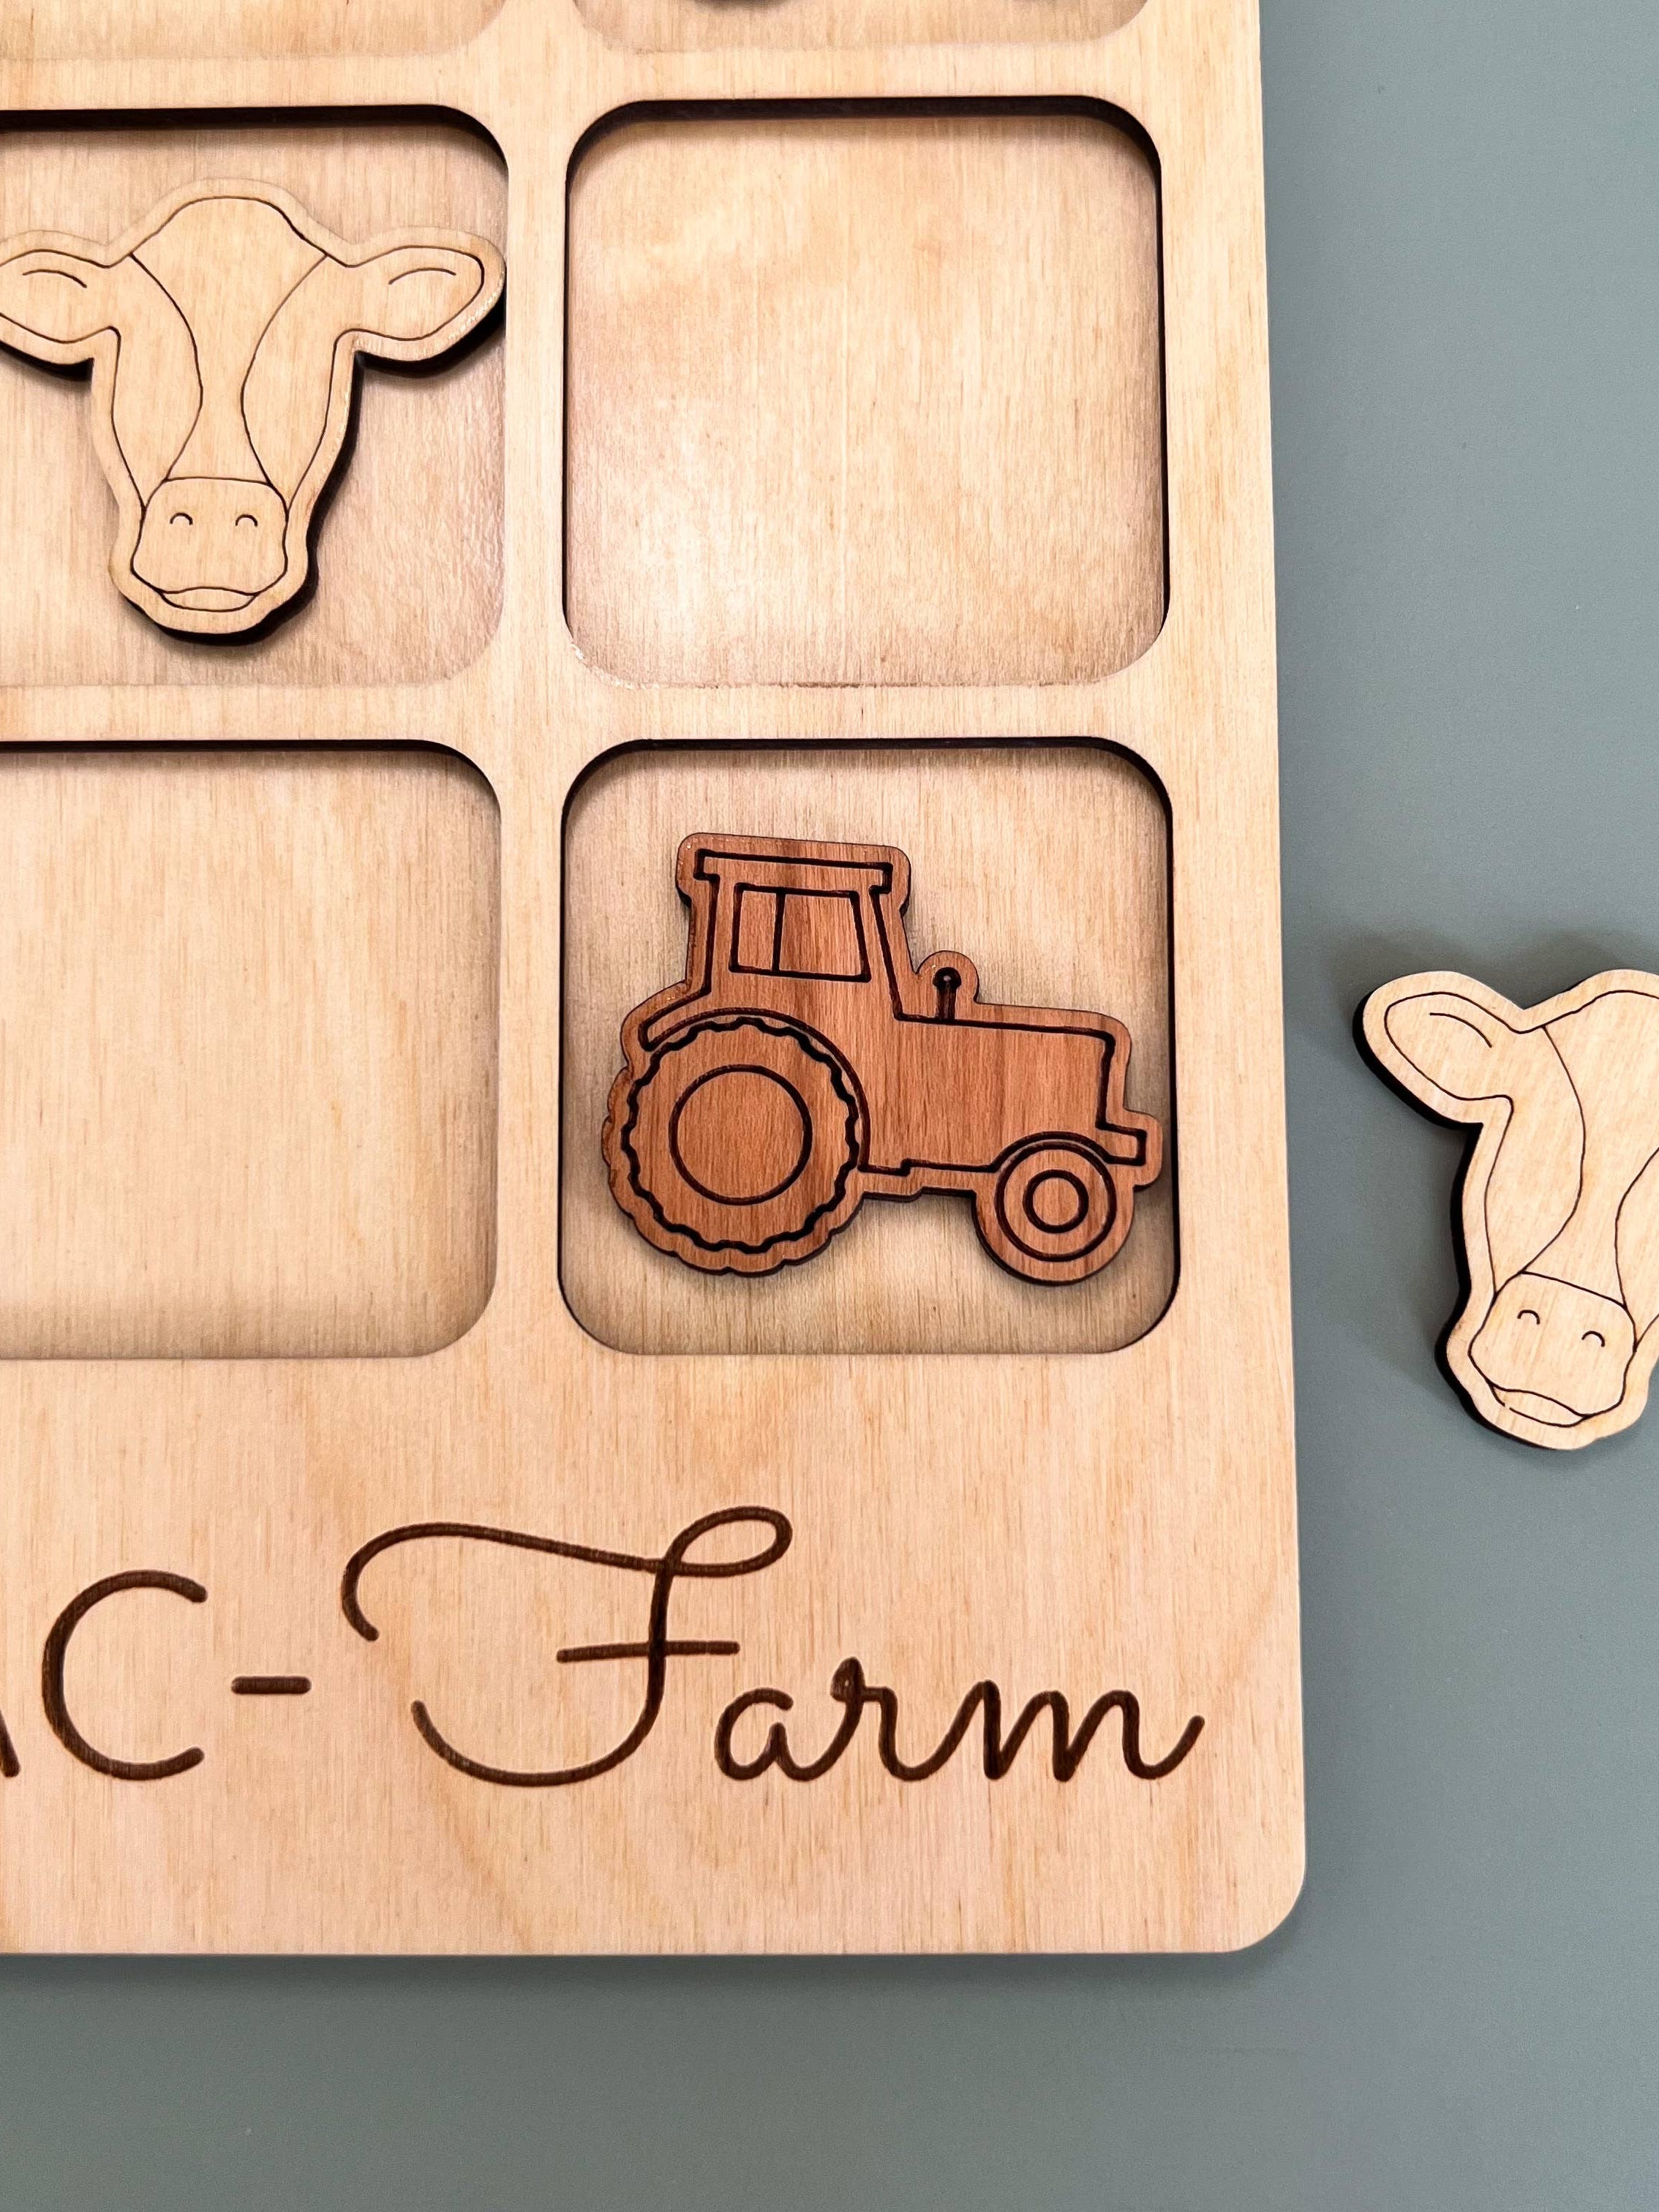 Farmer Gift - Tic-Tac-Toe Farm Game - Customizable: Cow + Tractor / FINISHED - Smooth Clear Coat     Birch House Living- Tilden Co.